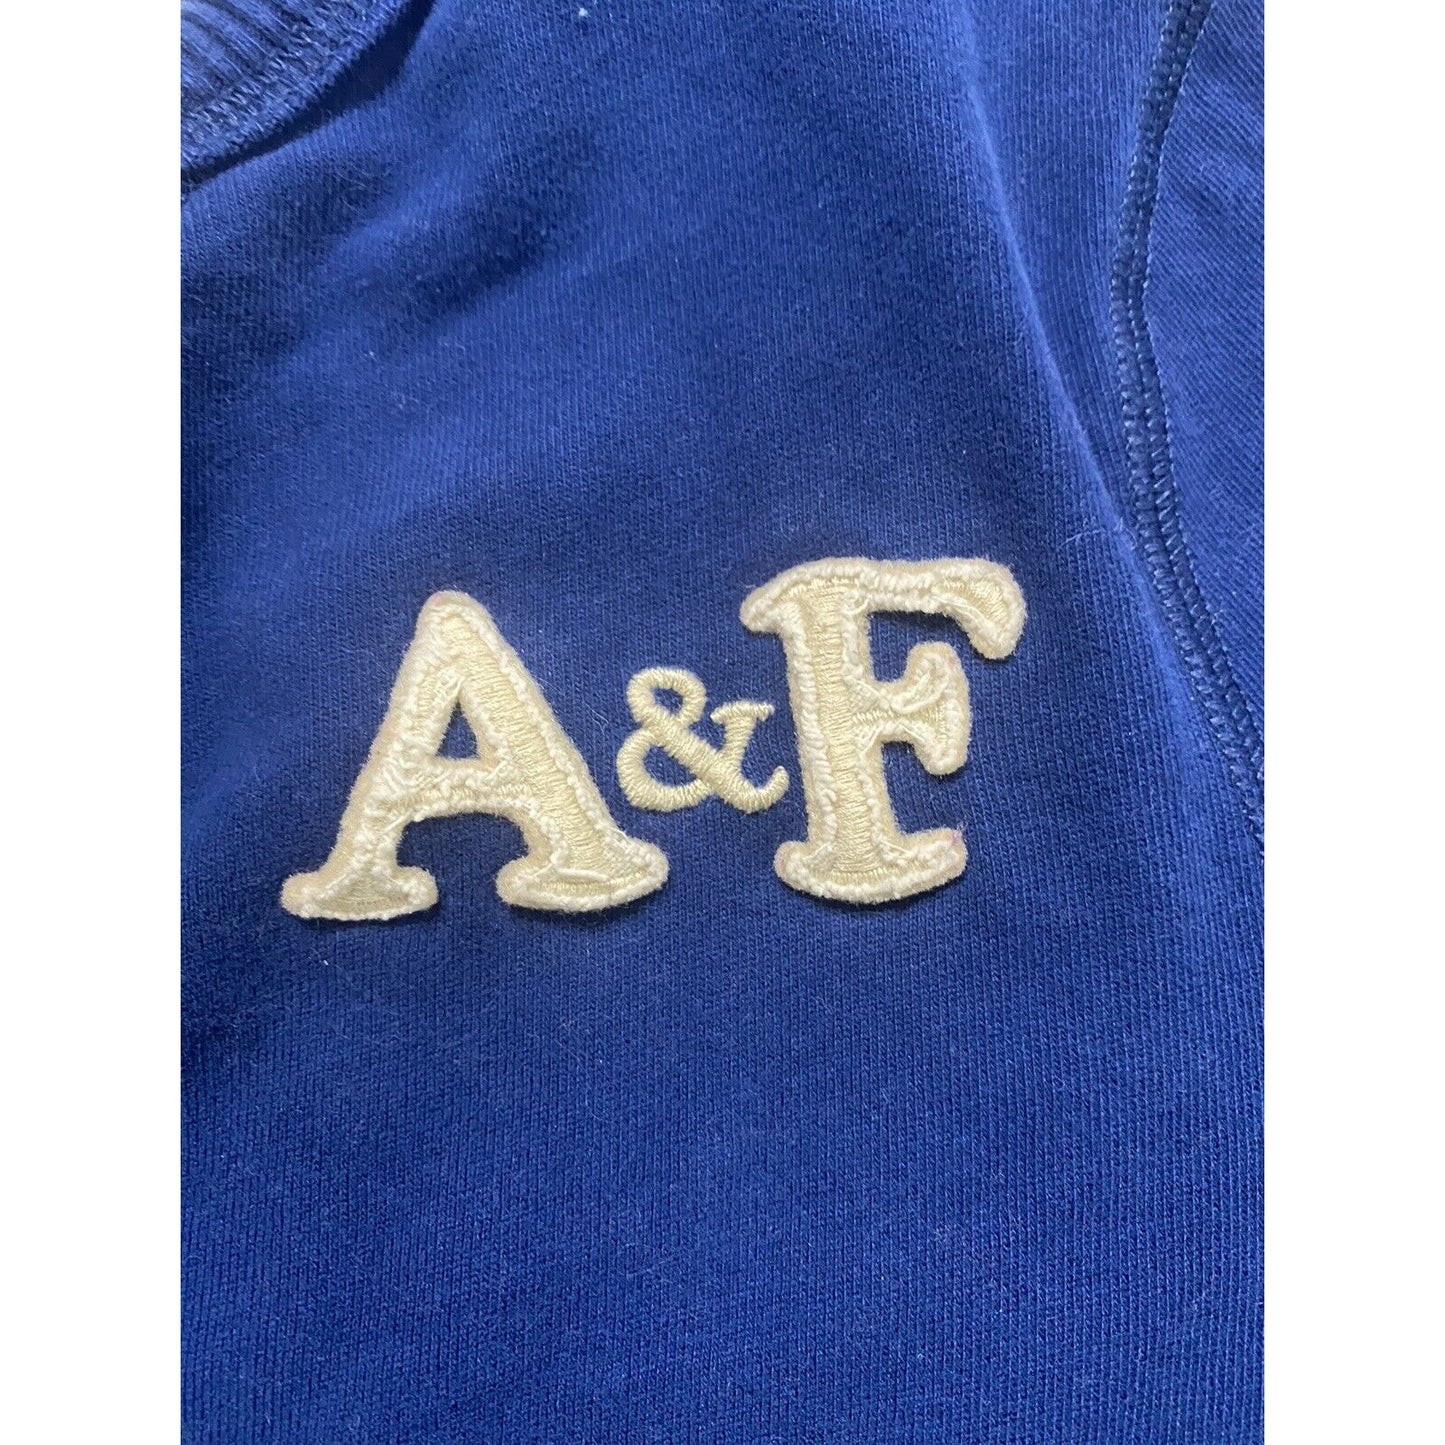 Abercrombie & Fitch Athletics Navy Blue Men’s Medium Muscle Fit Pullover Sweater